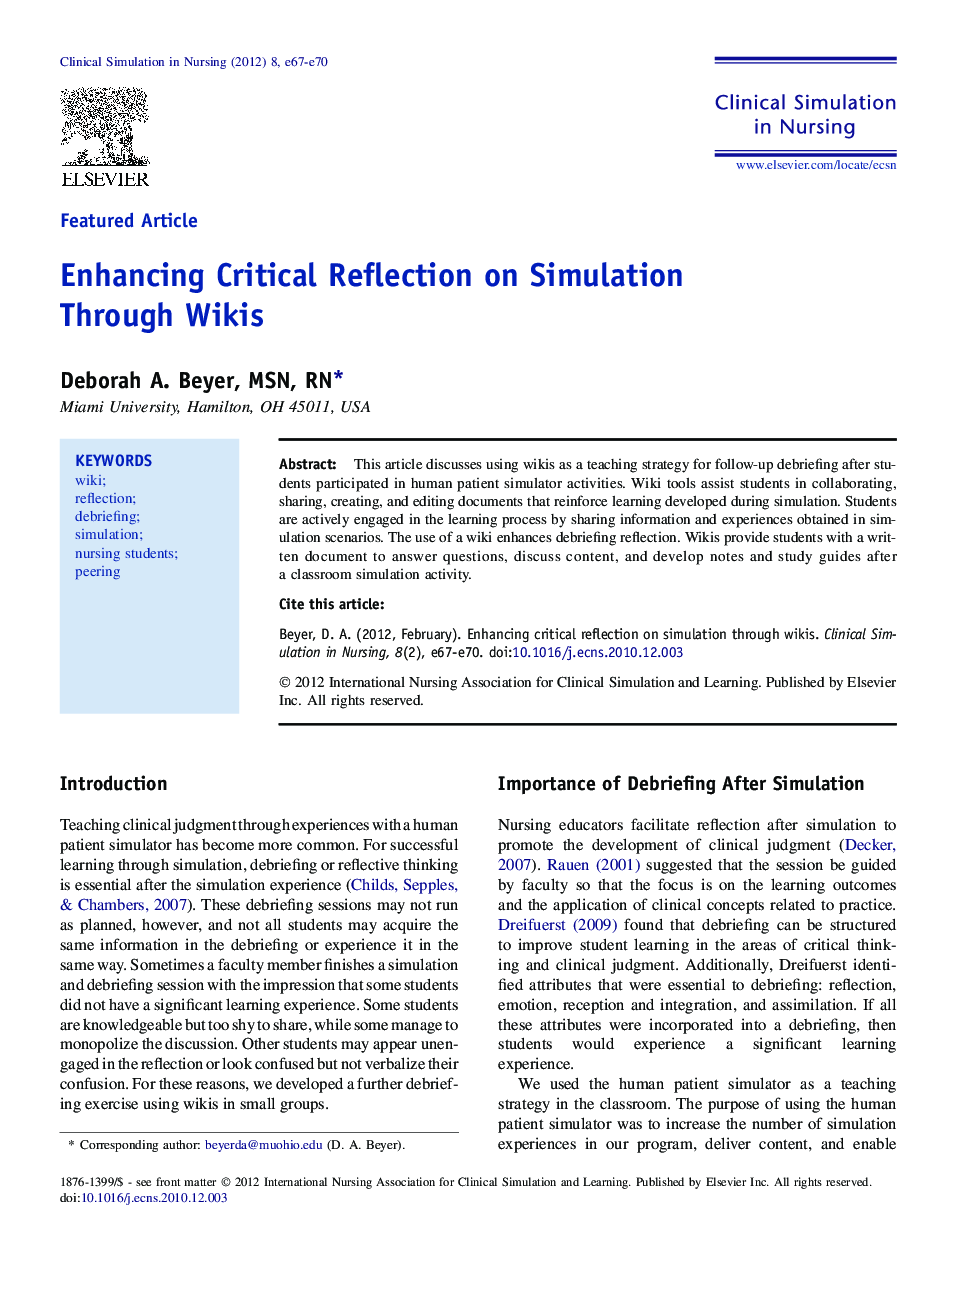 Enhancing Critical Reflection on Simulation Through Wikis